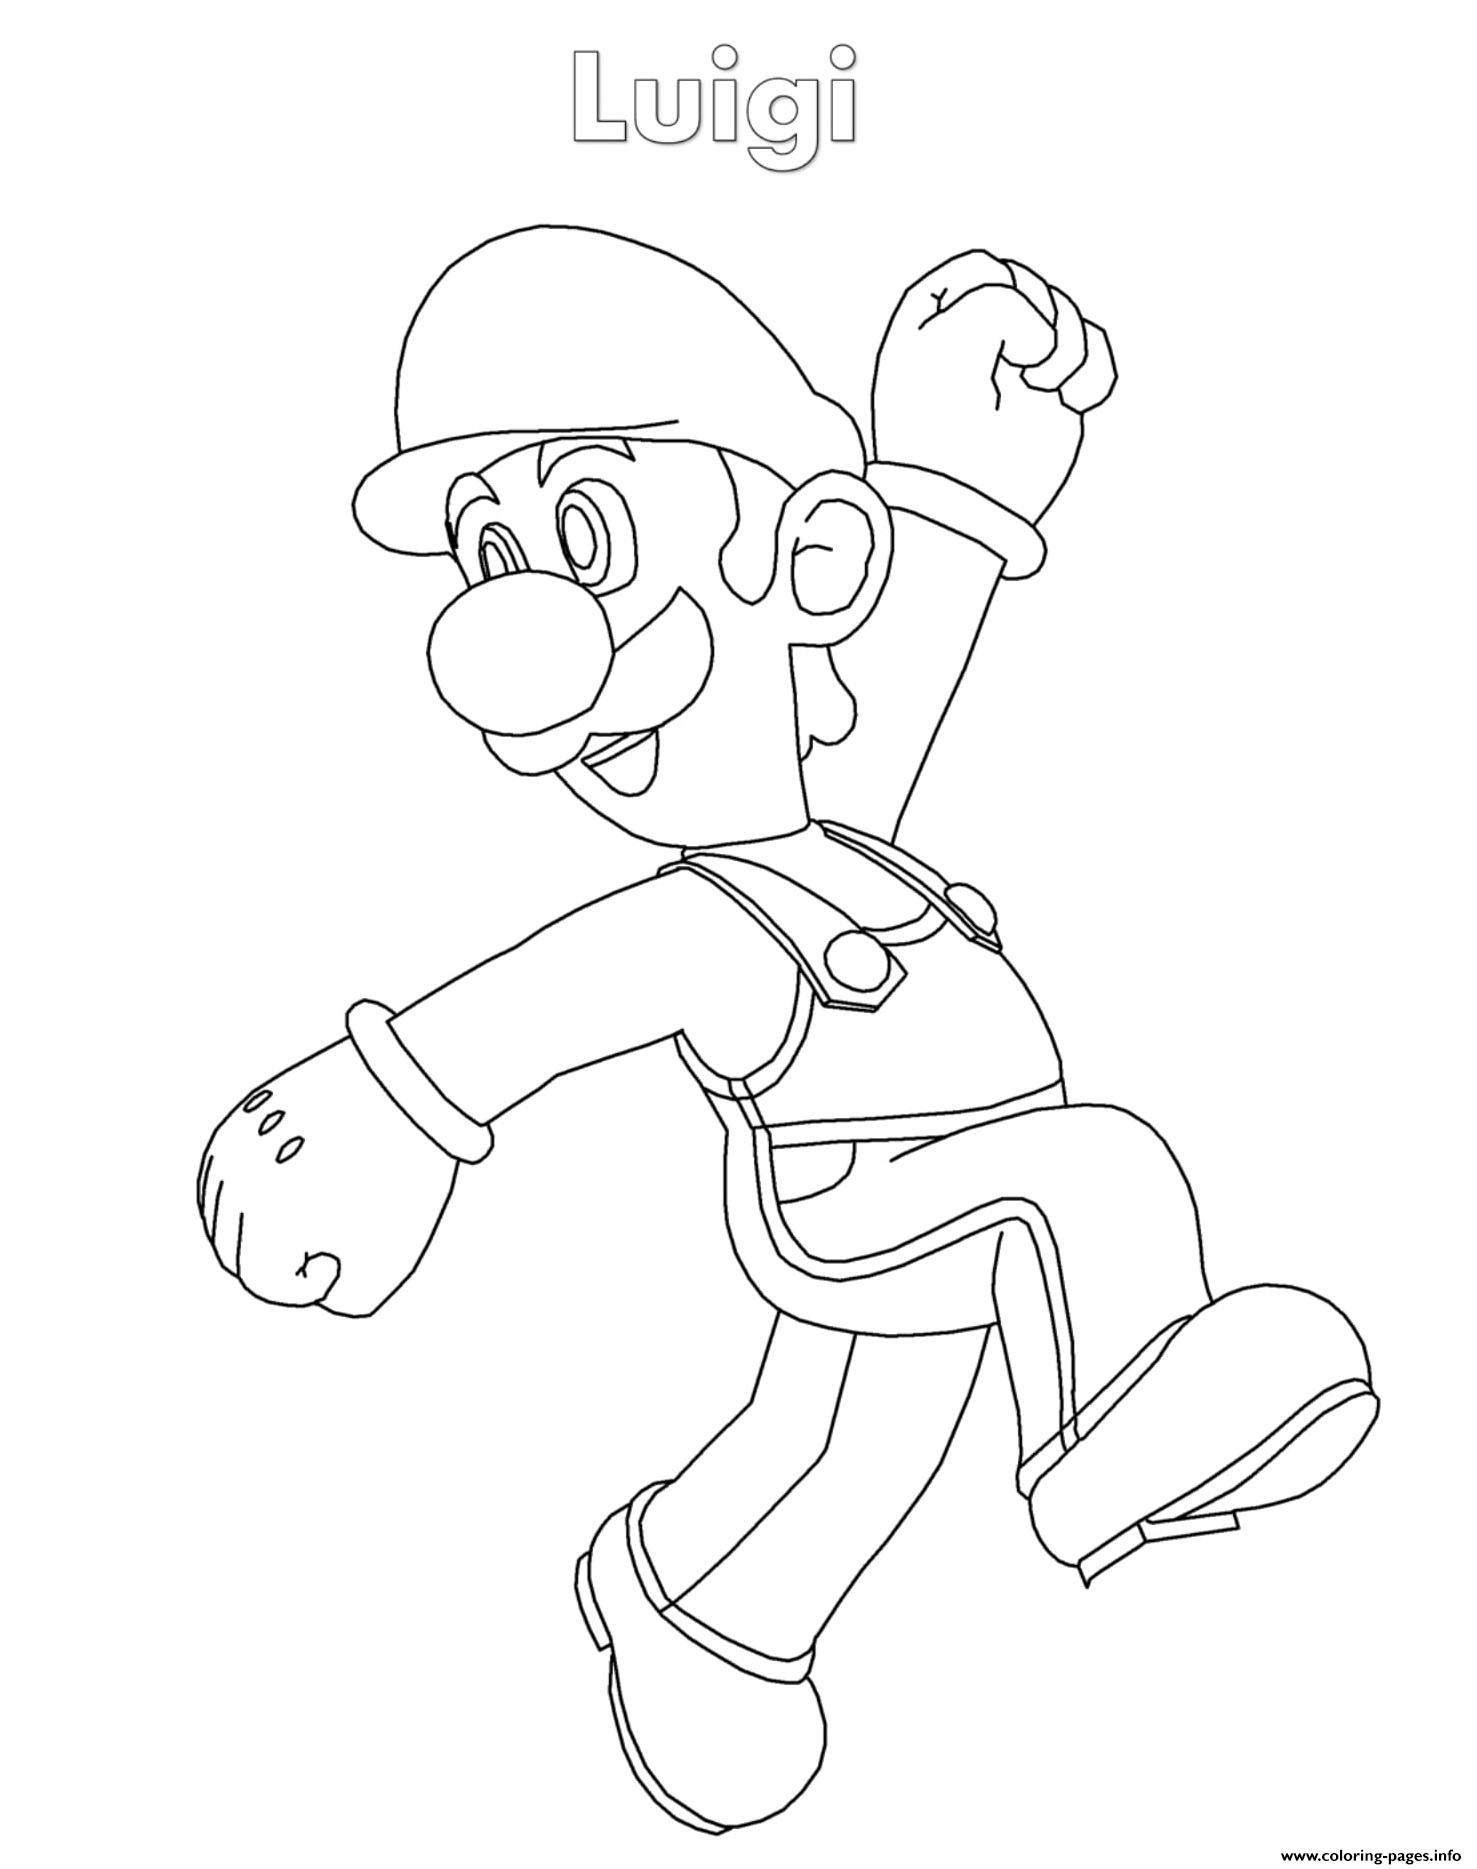 Super Mario Odyssey Luigi Coloring Pages Coloring Pages